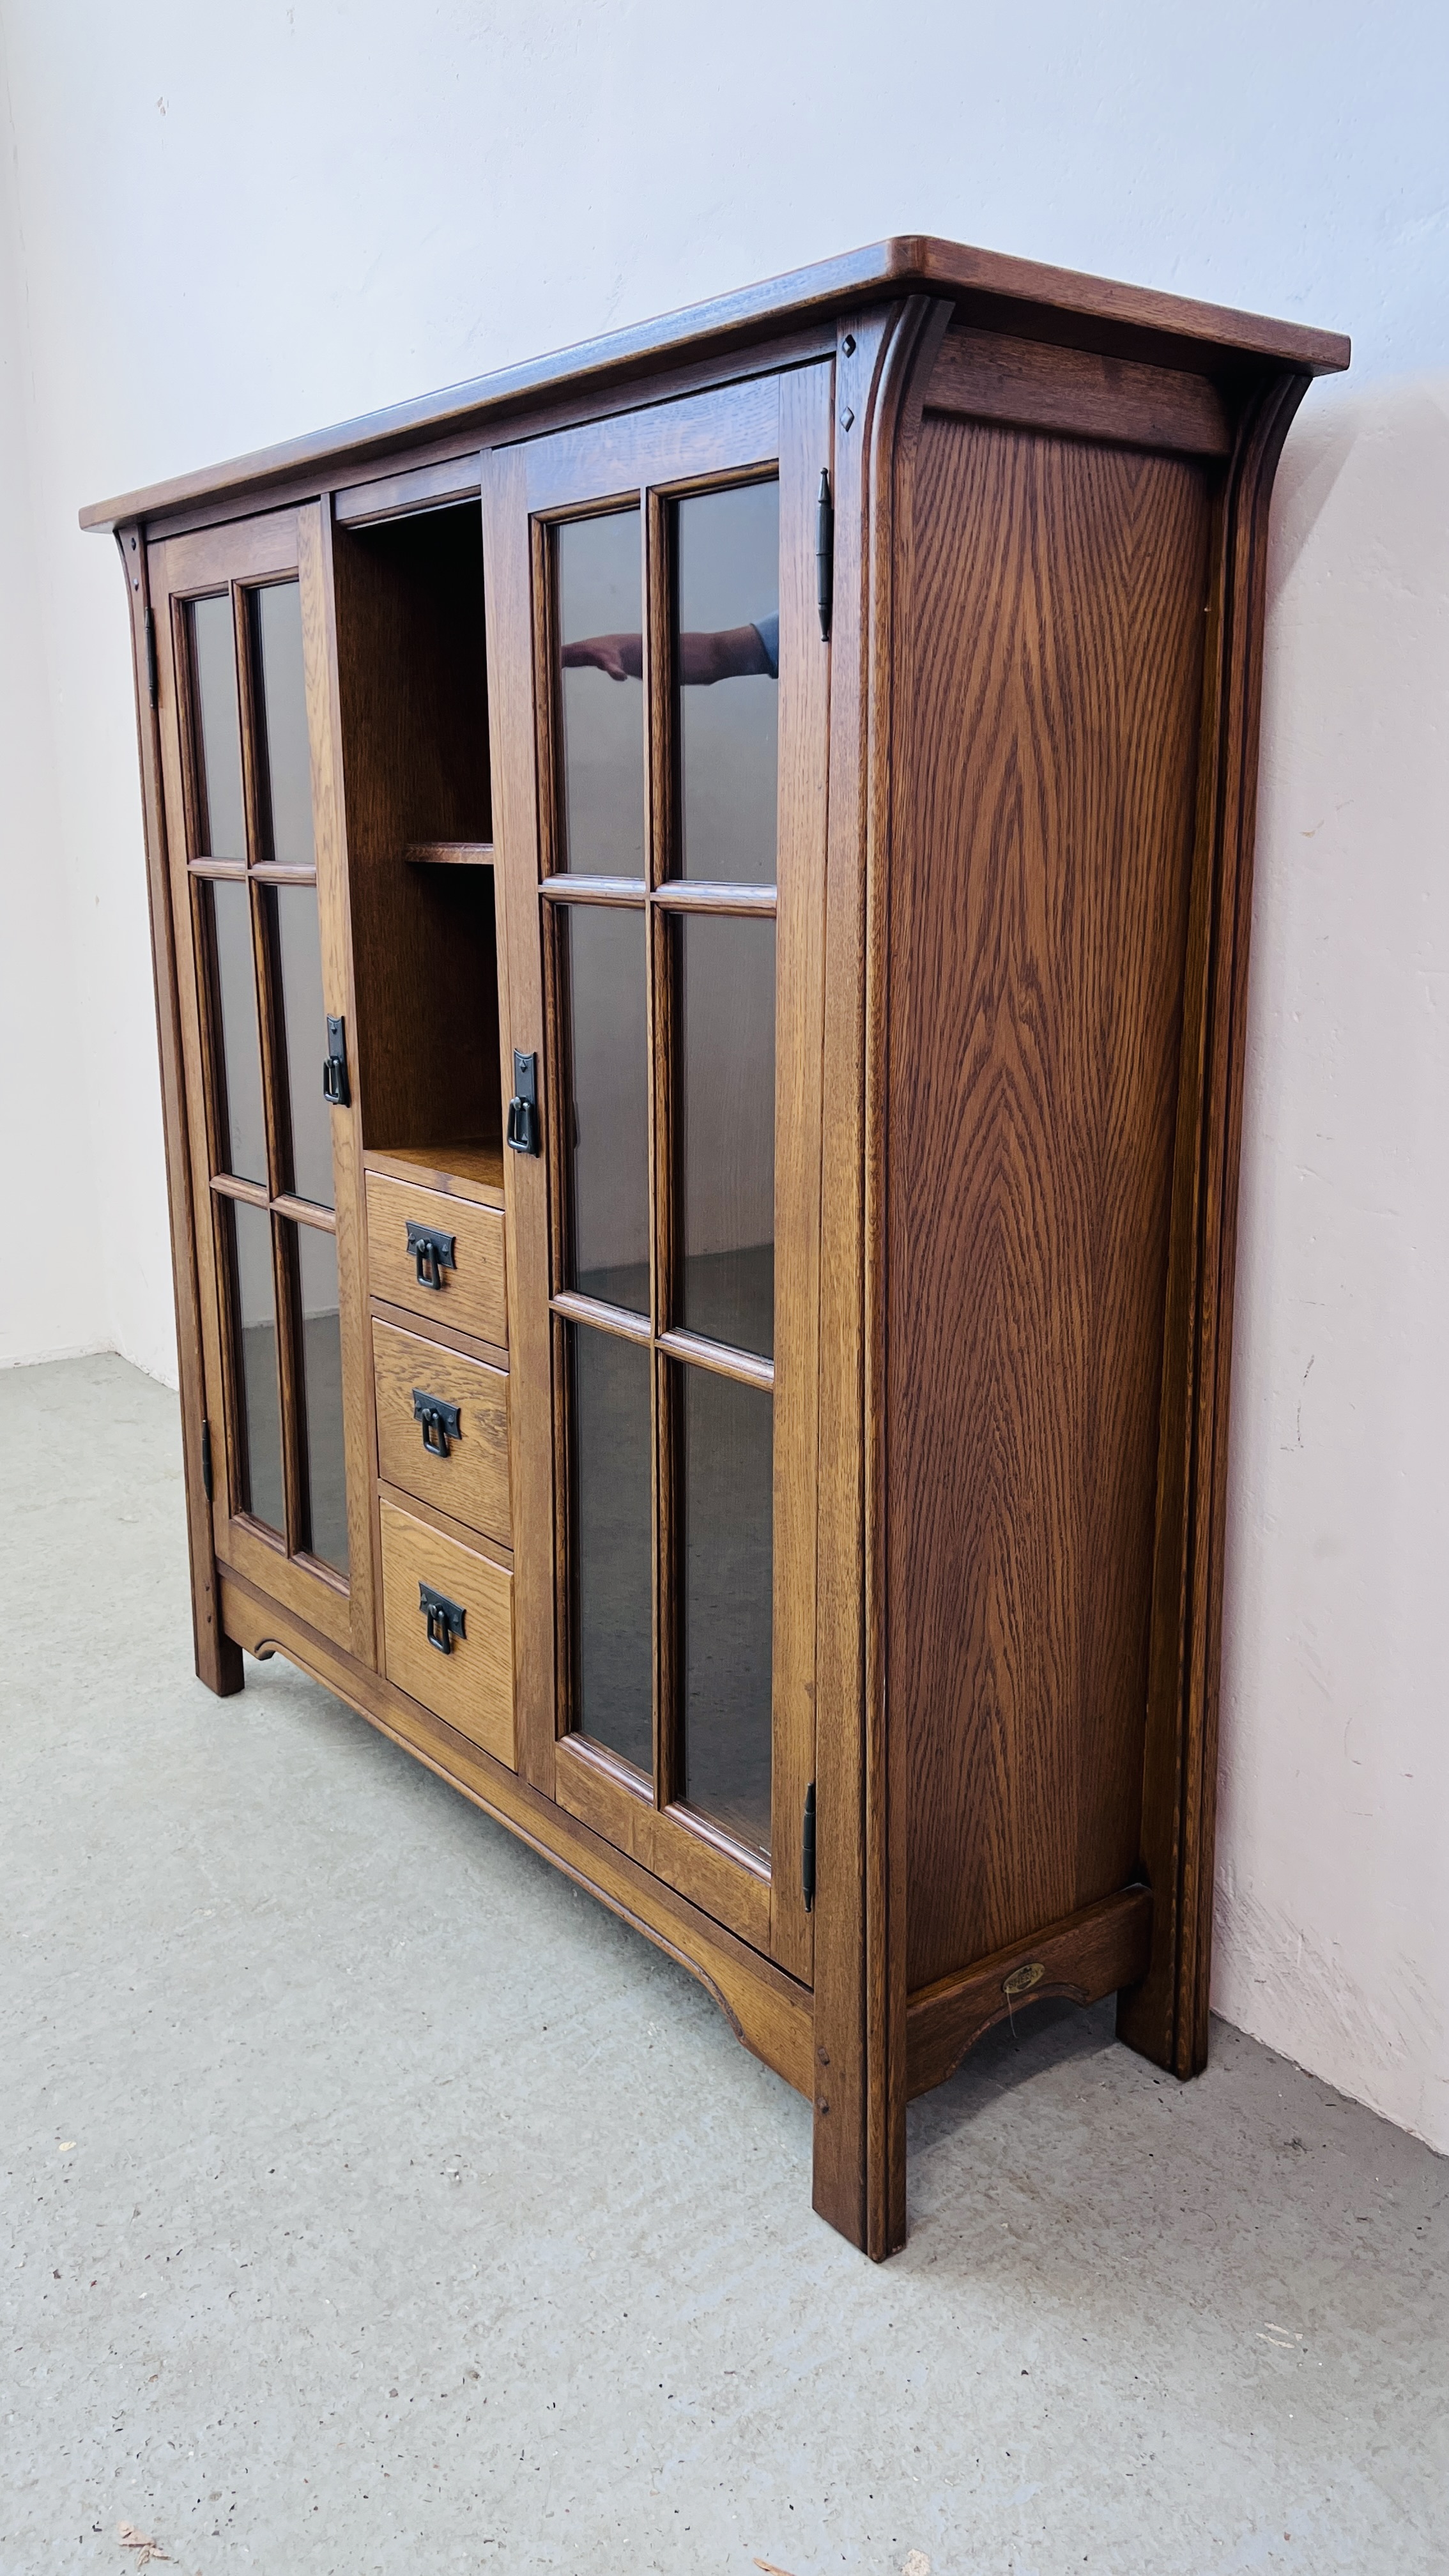 A GOOD QUALITY COMBINATION OAK DISPLAY CABINET WITH CENTRAL DRAWERS AND SHELVES WIDTH 130CM. - Image 2 of 13